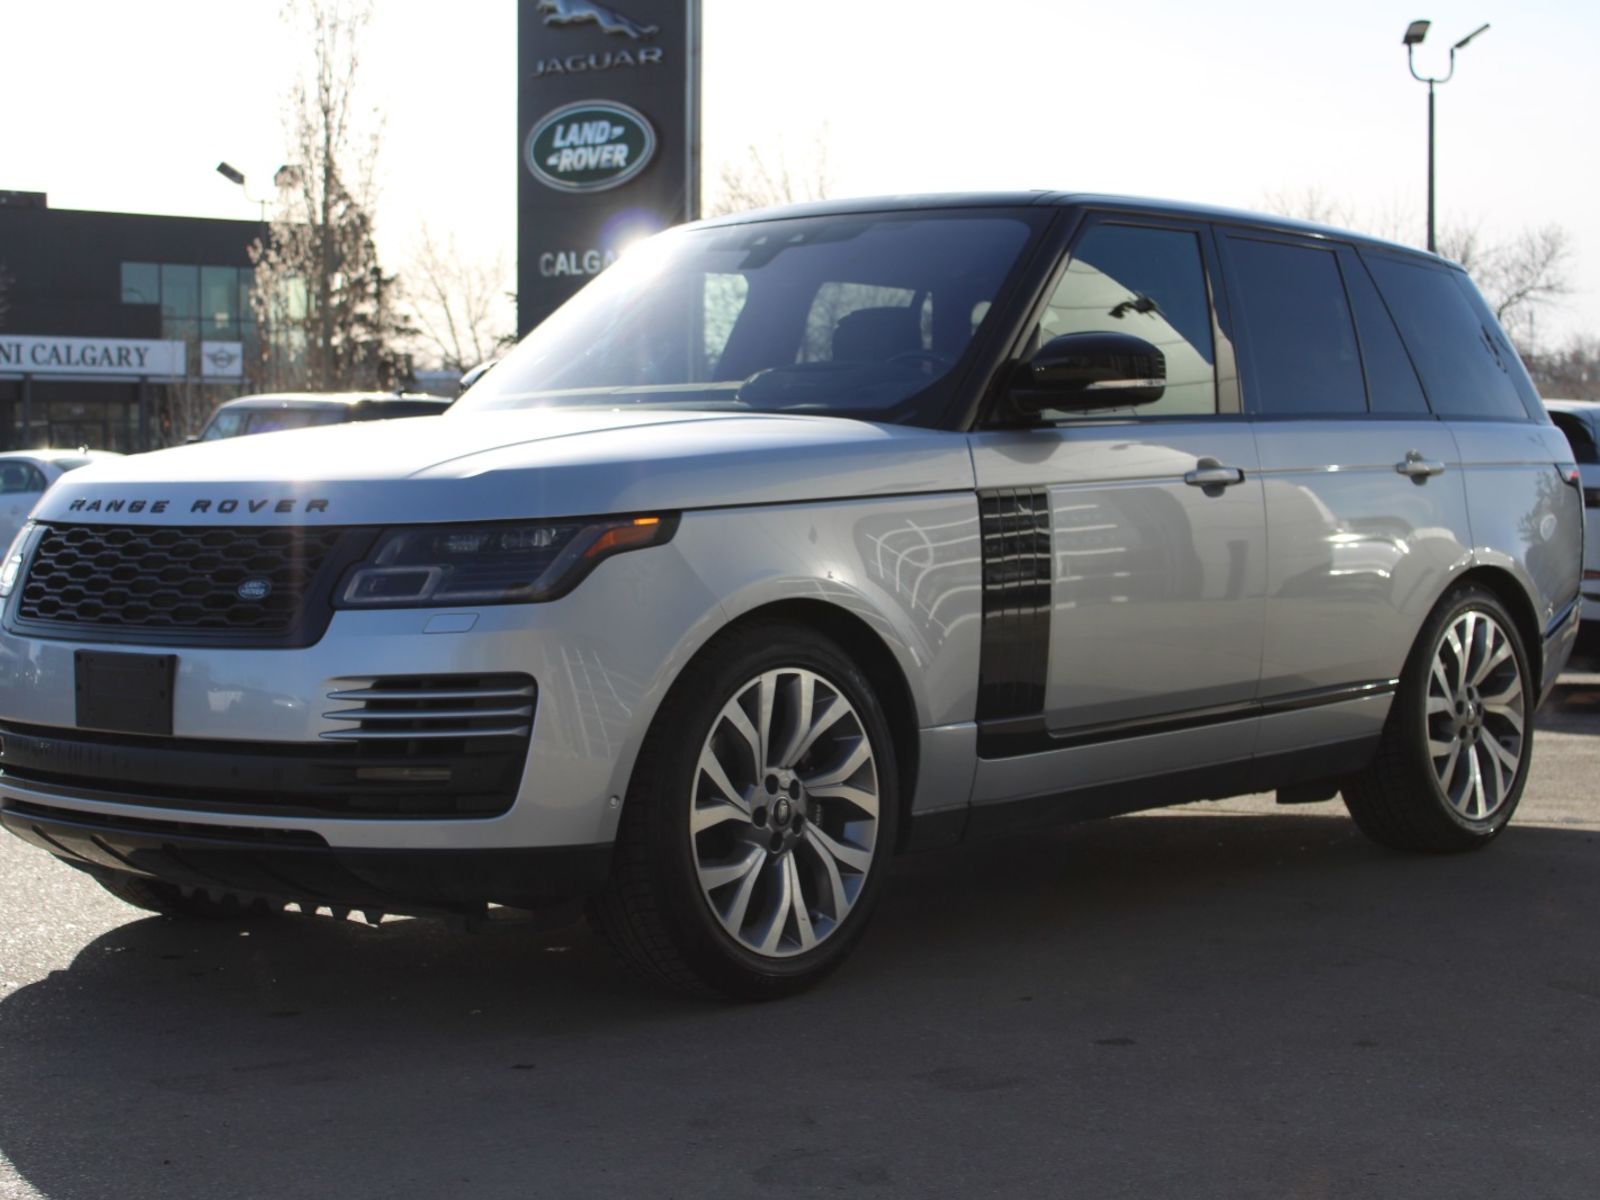 2019 Land Rover Range Rover NEW FRONT/REAR BRAKES, NEW TIRES & UP TO DATE SERV